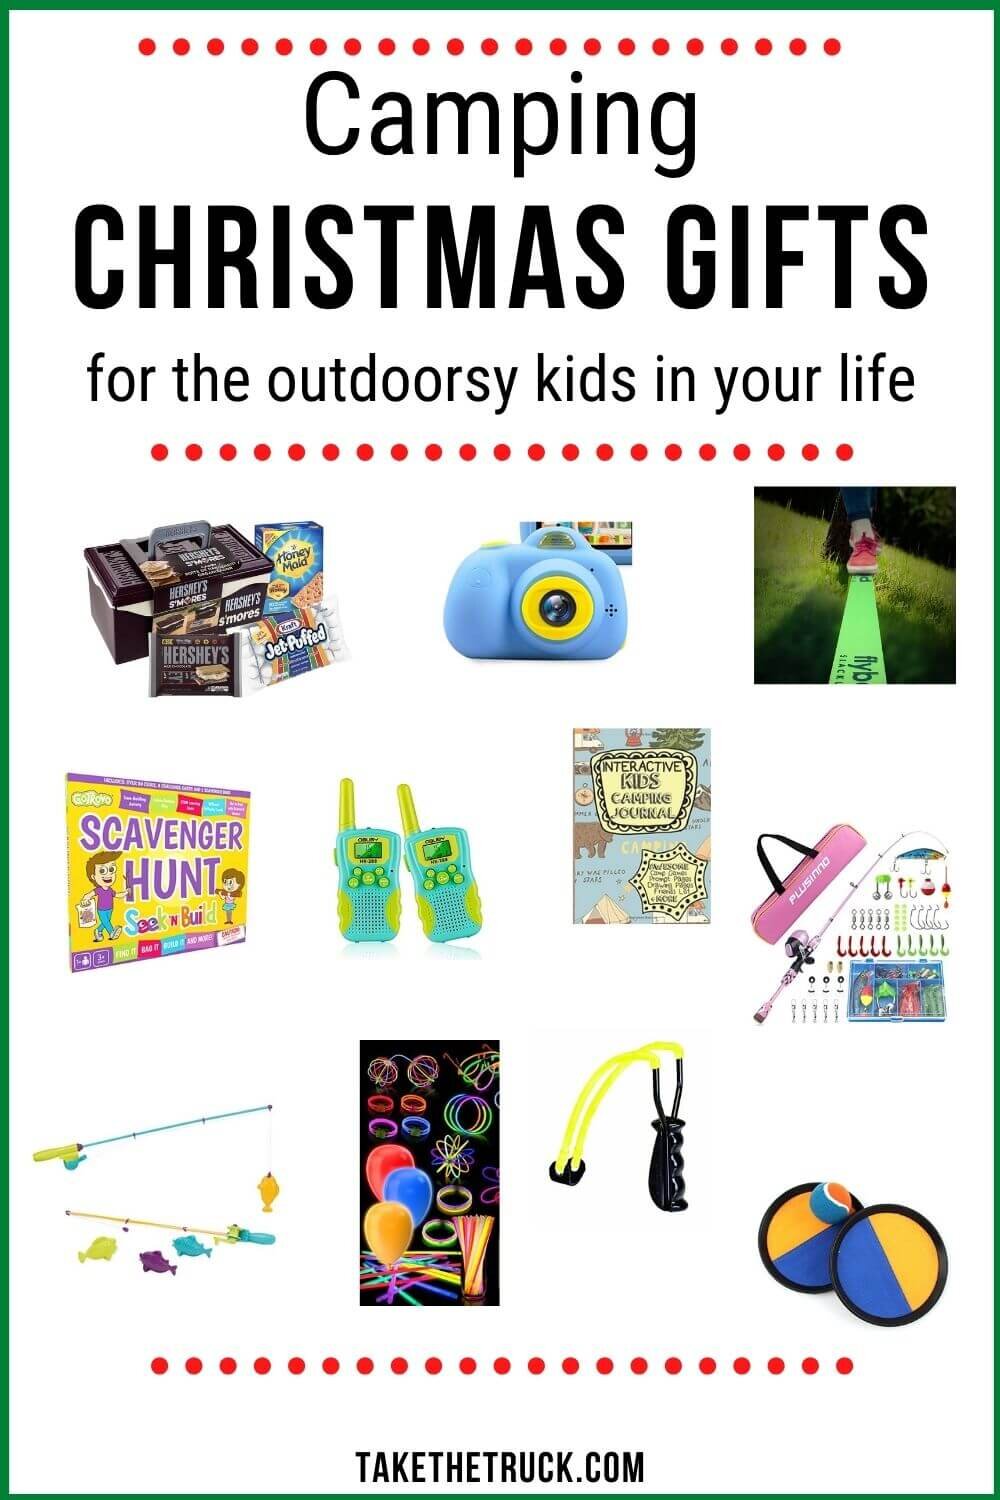 Share 75+ camping christmas gifts best